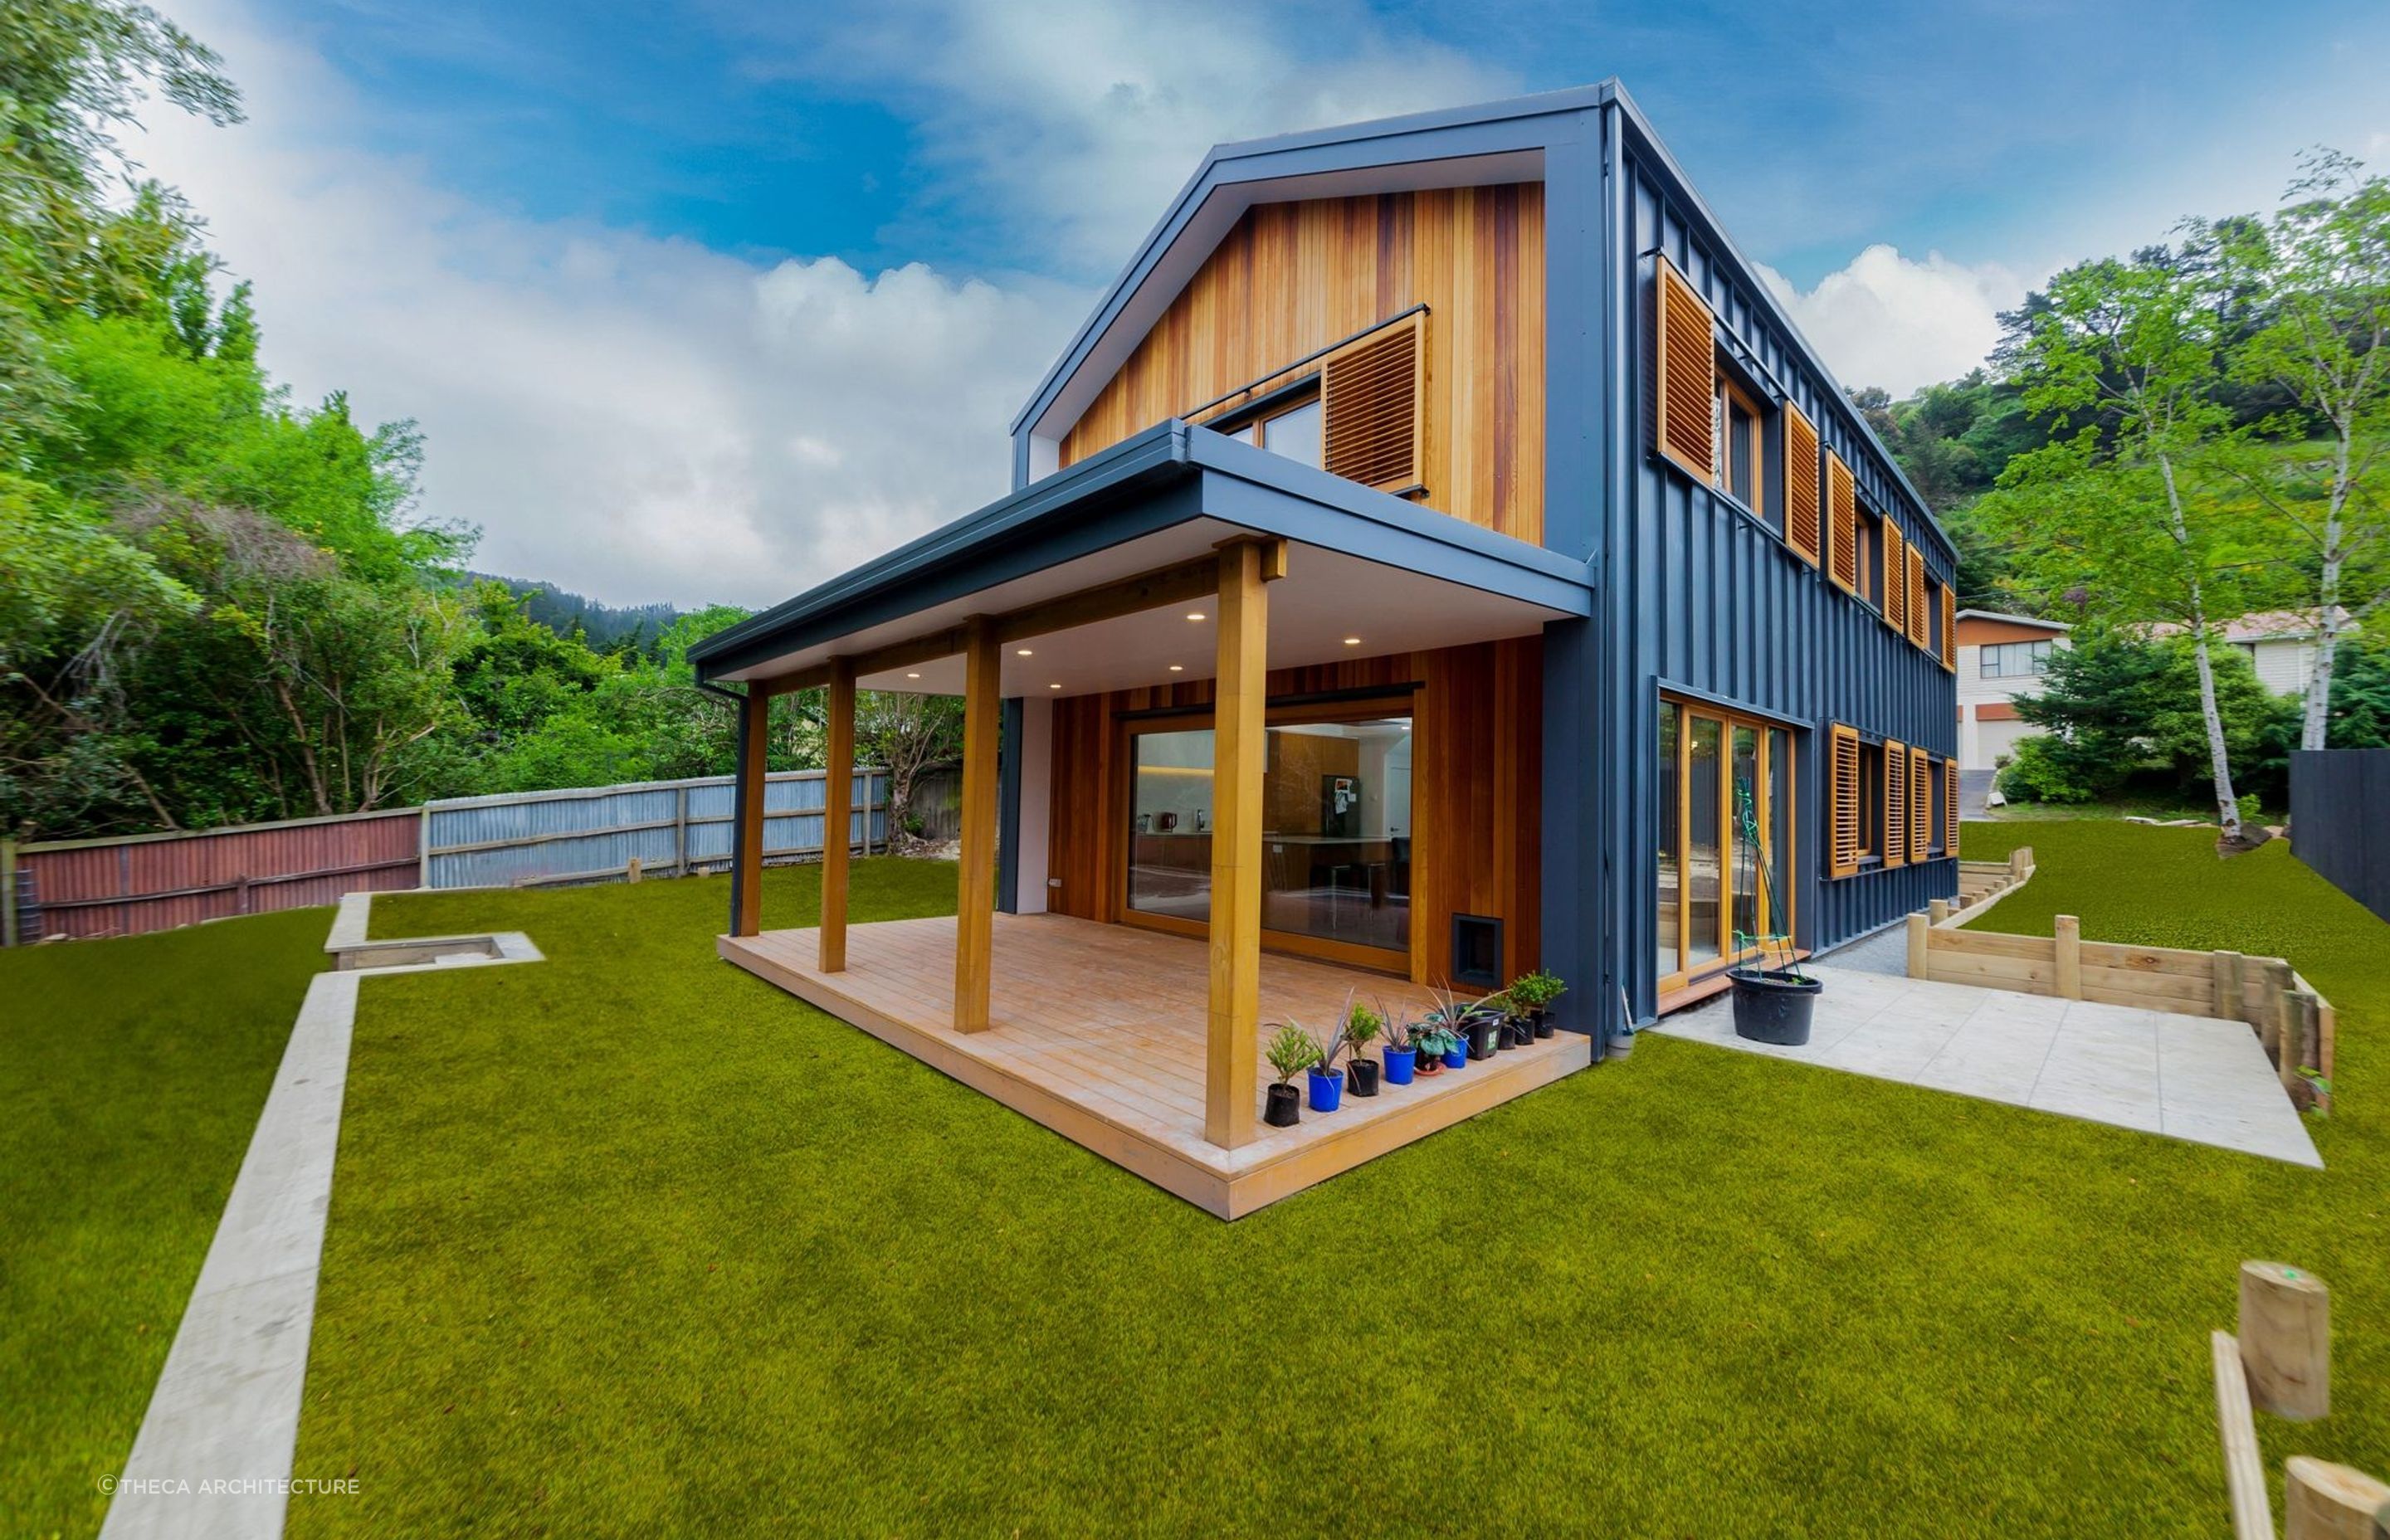 The Pitkin Douglas House was the first certified Passive House in the South Island.